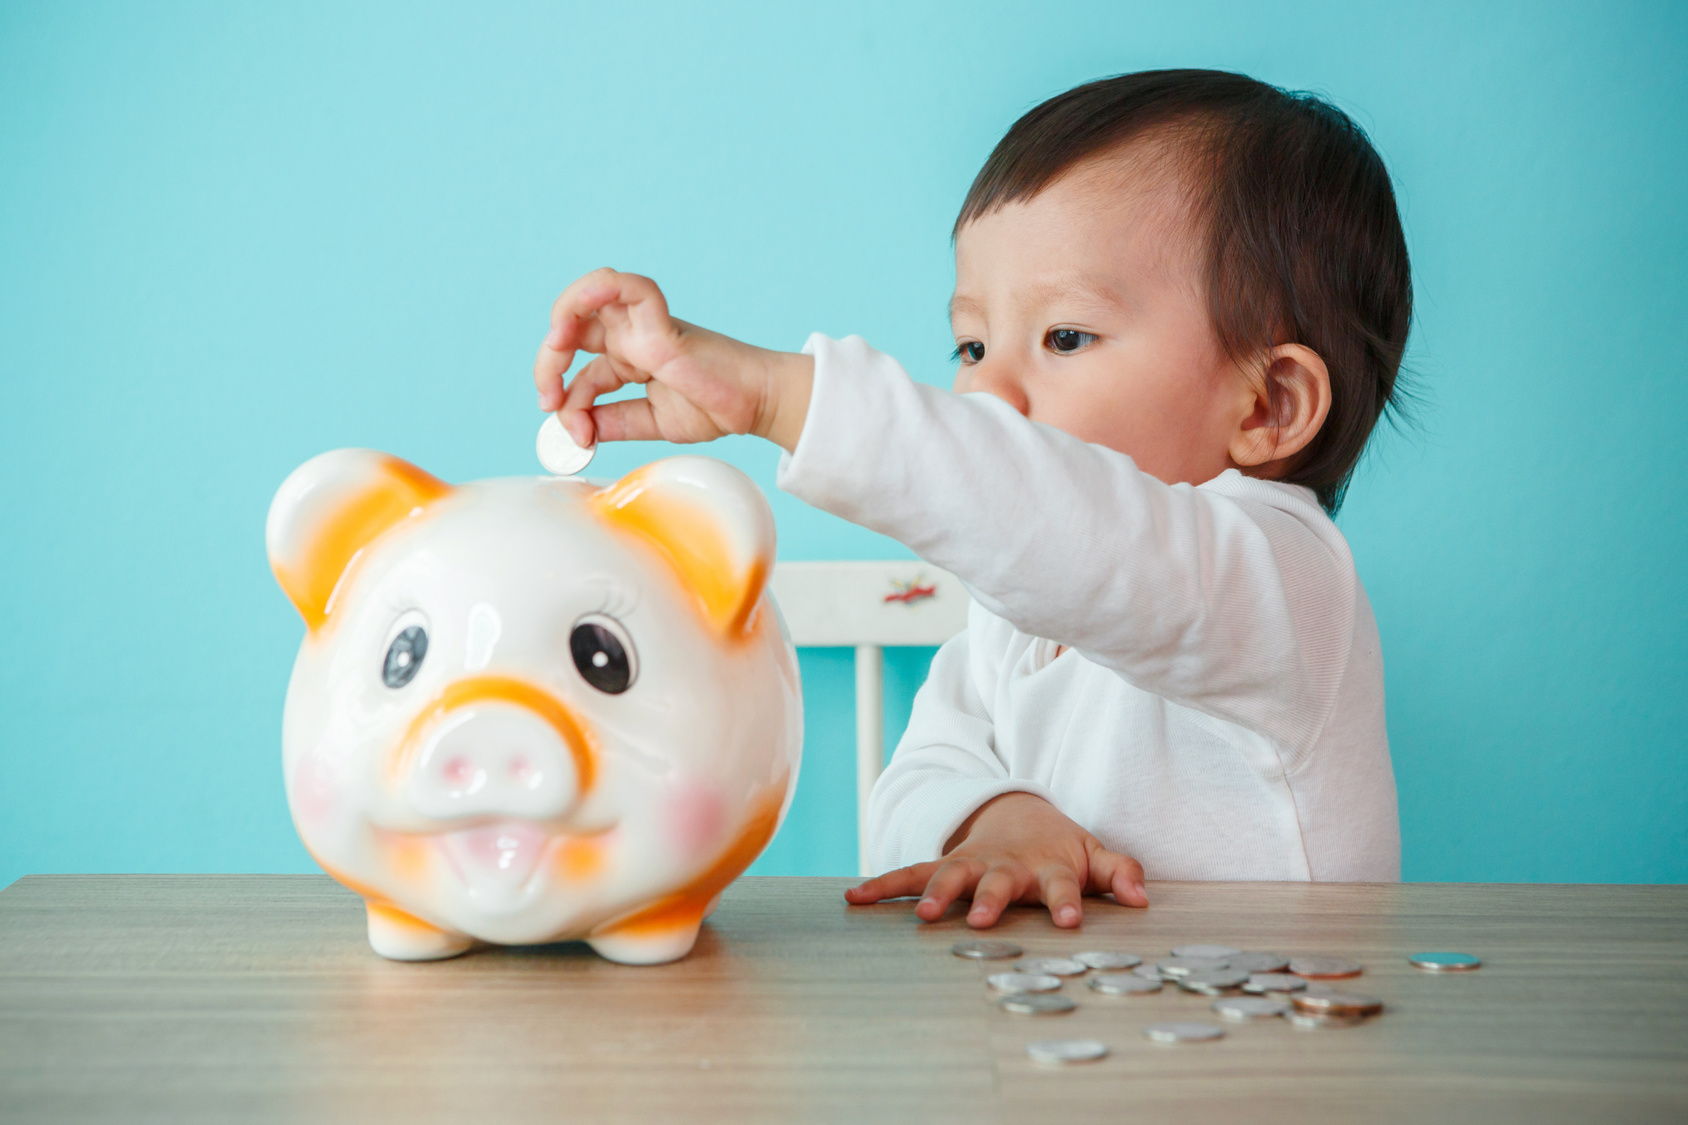 little baby moneybox putting a coin into a piggy bank - kid saving money for future concept